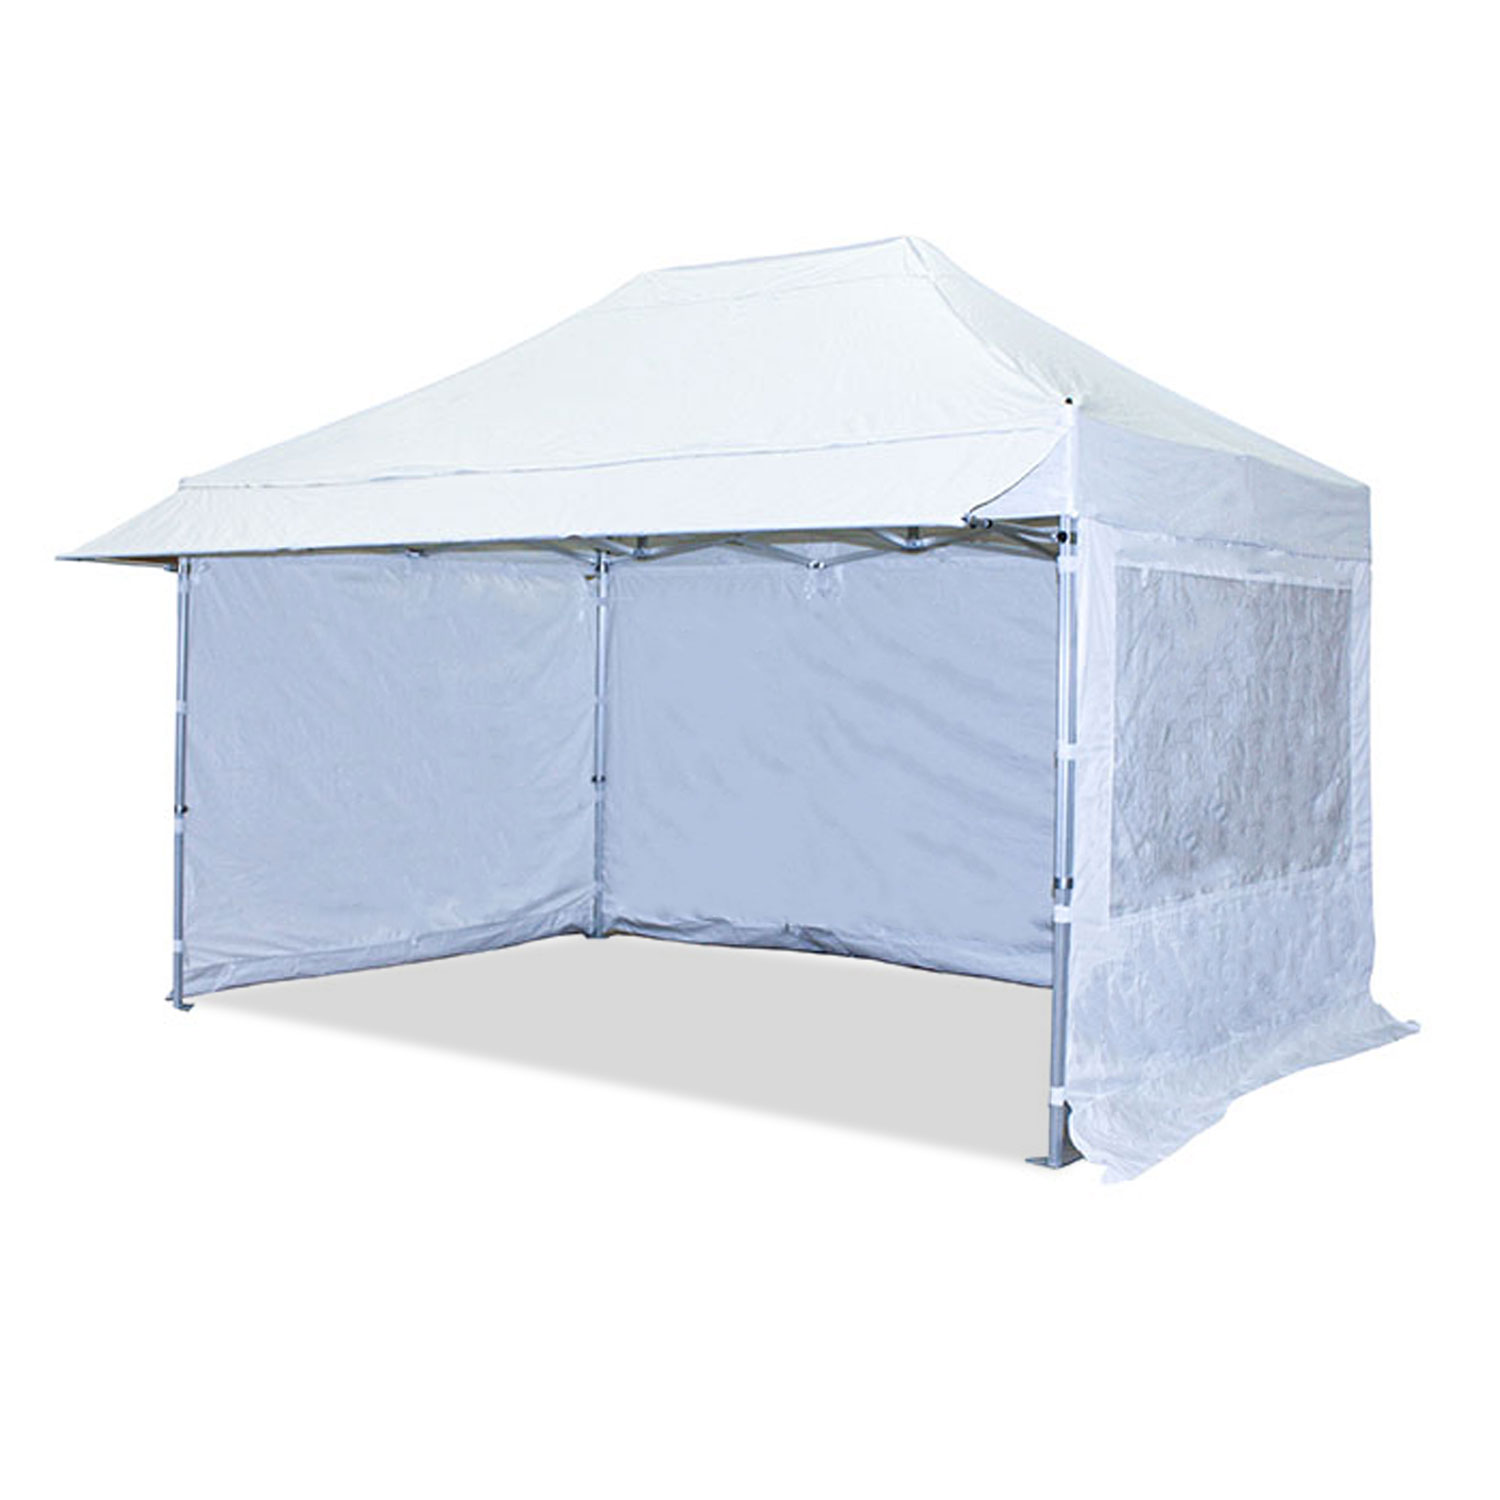 3M-X-2M-CANOPRO-ELITE-WITH-AWNING-WHITE